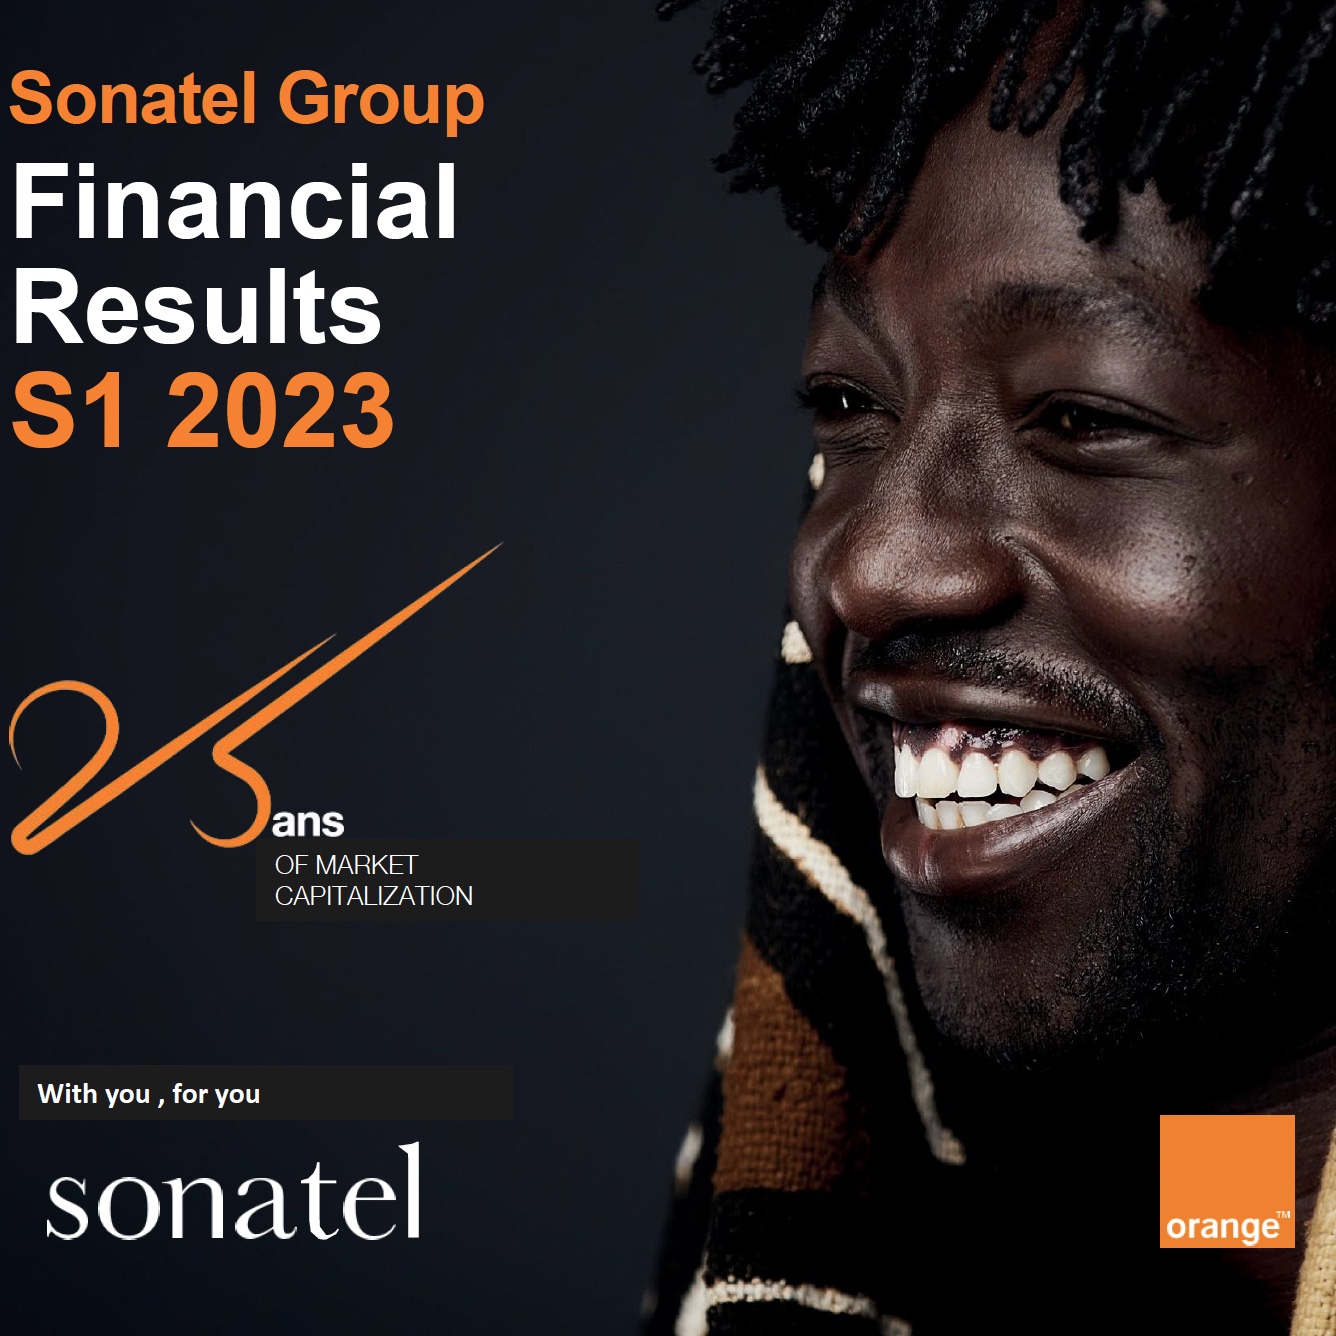 Financial results for the 1st half of 2023 of the Sonatel Group